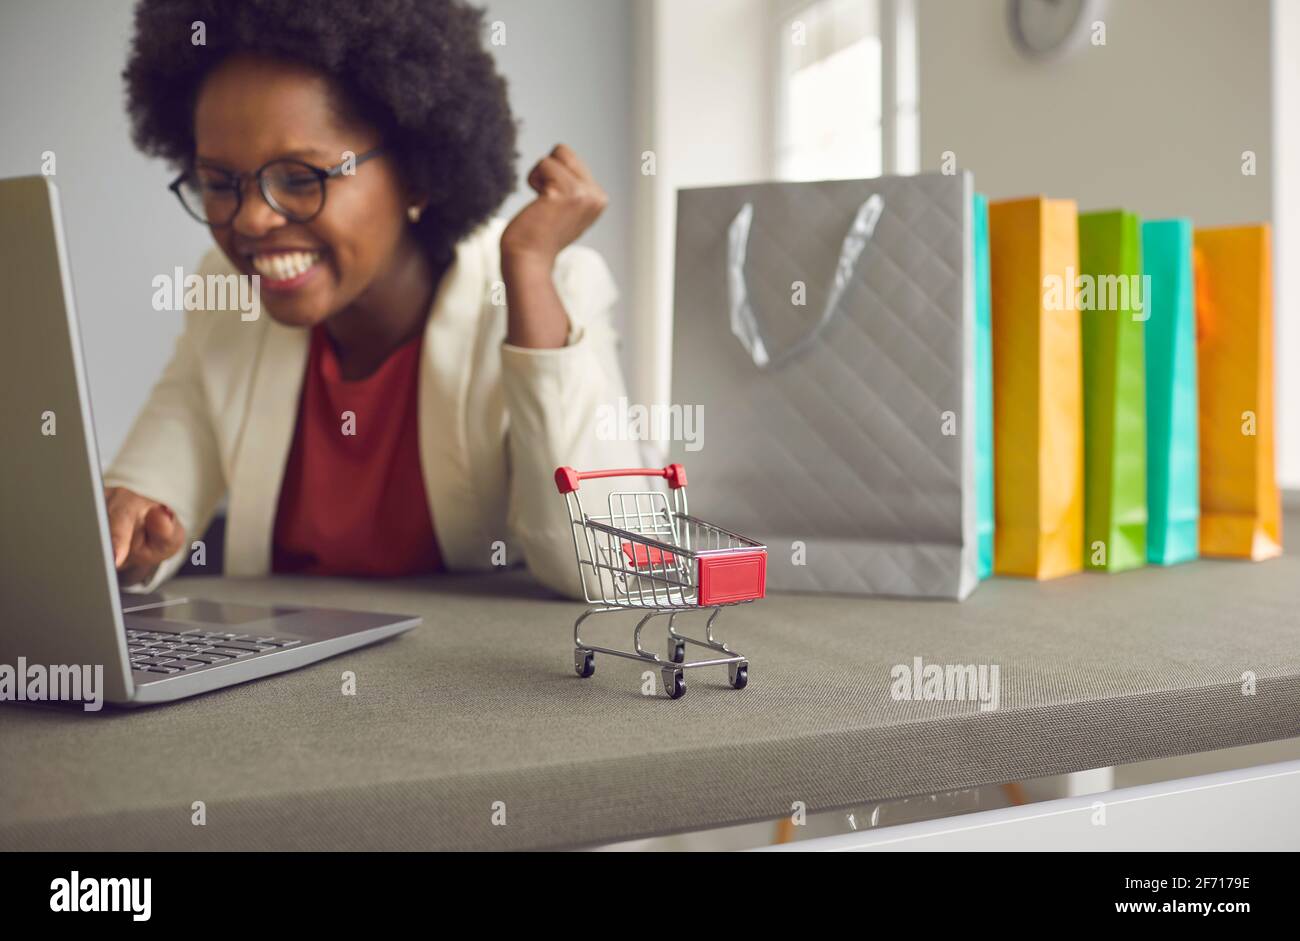 Close up of a small grocery cart on a table behind which a dark skinned woman is shopping online. Stock Photo